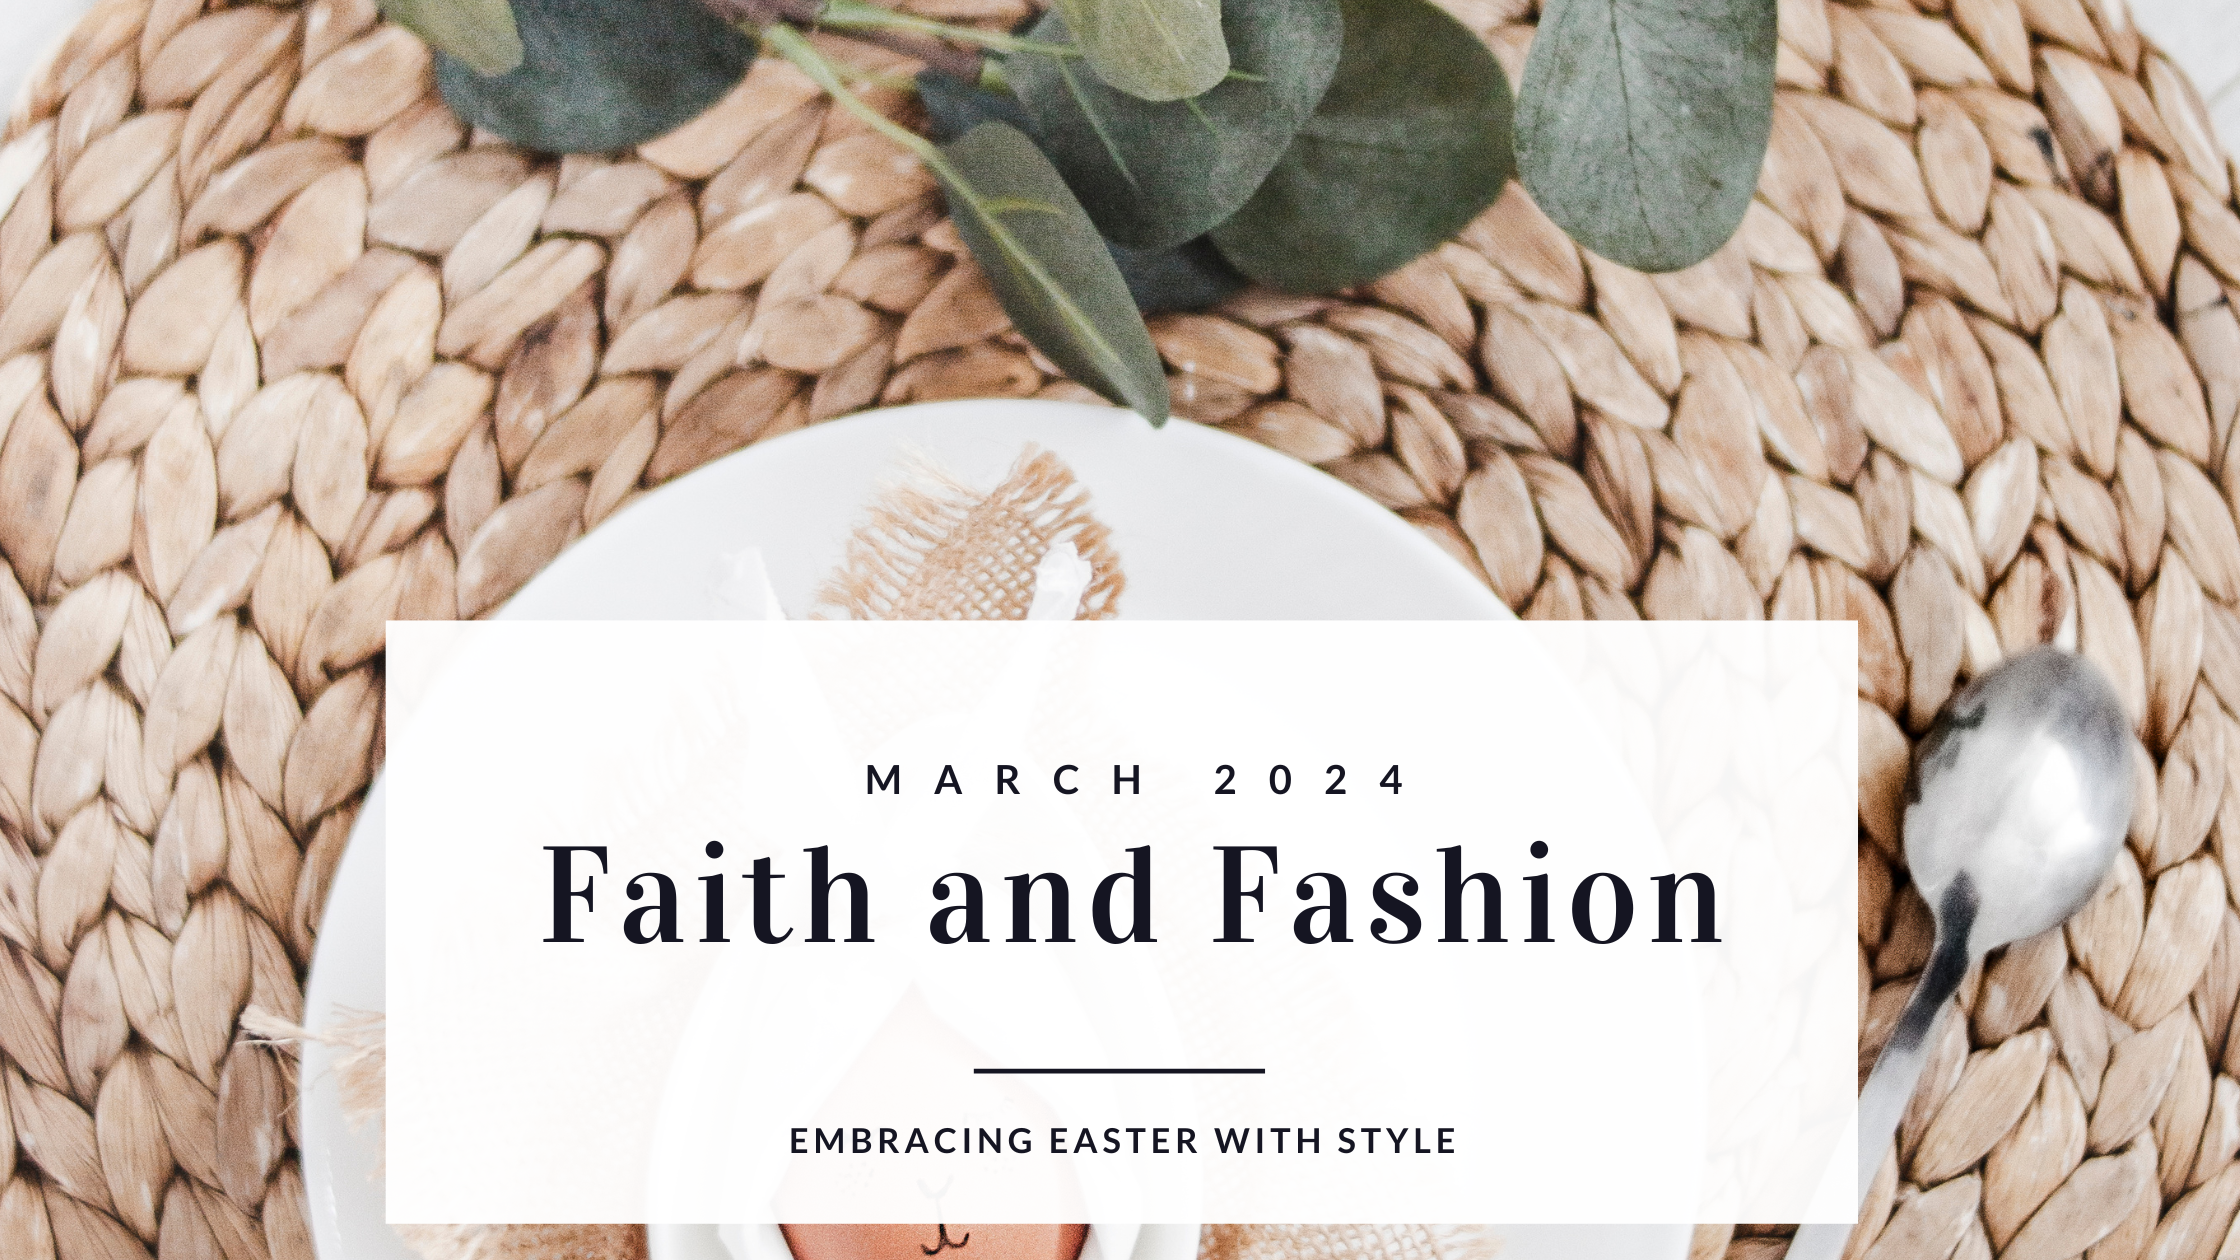 Faith and Fashion: Embracing Easter with Style